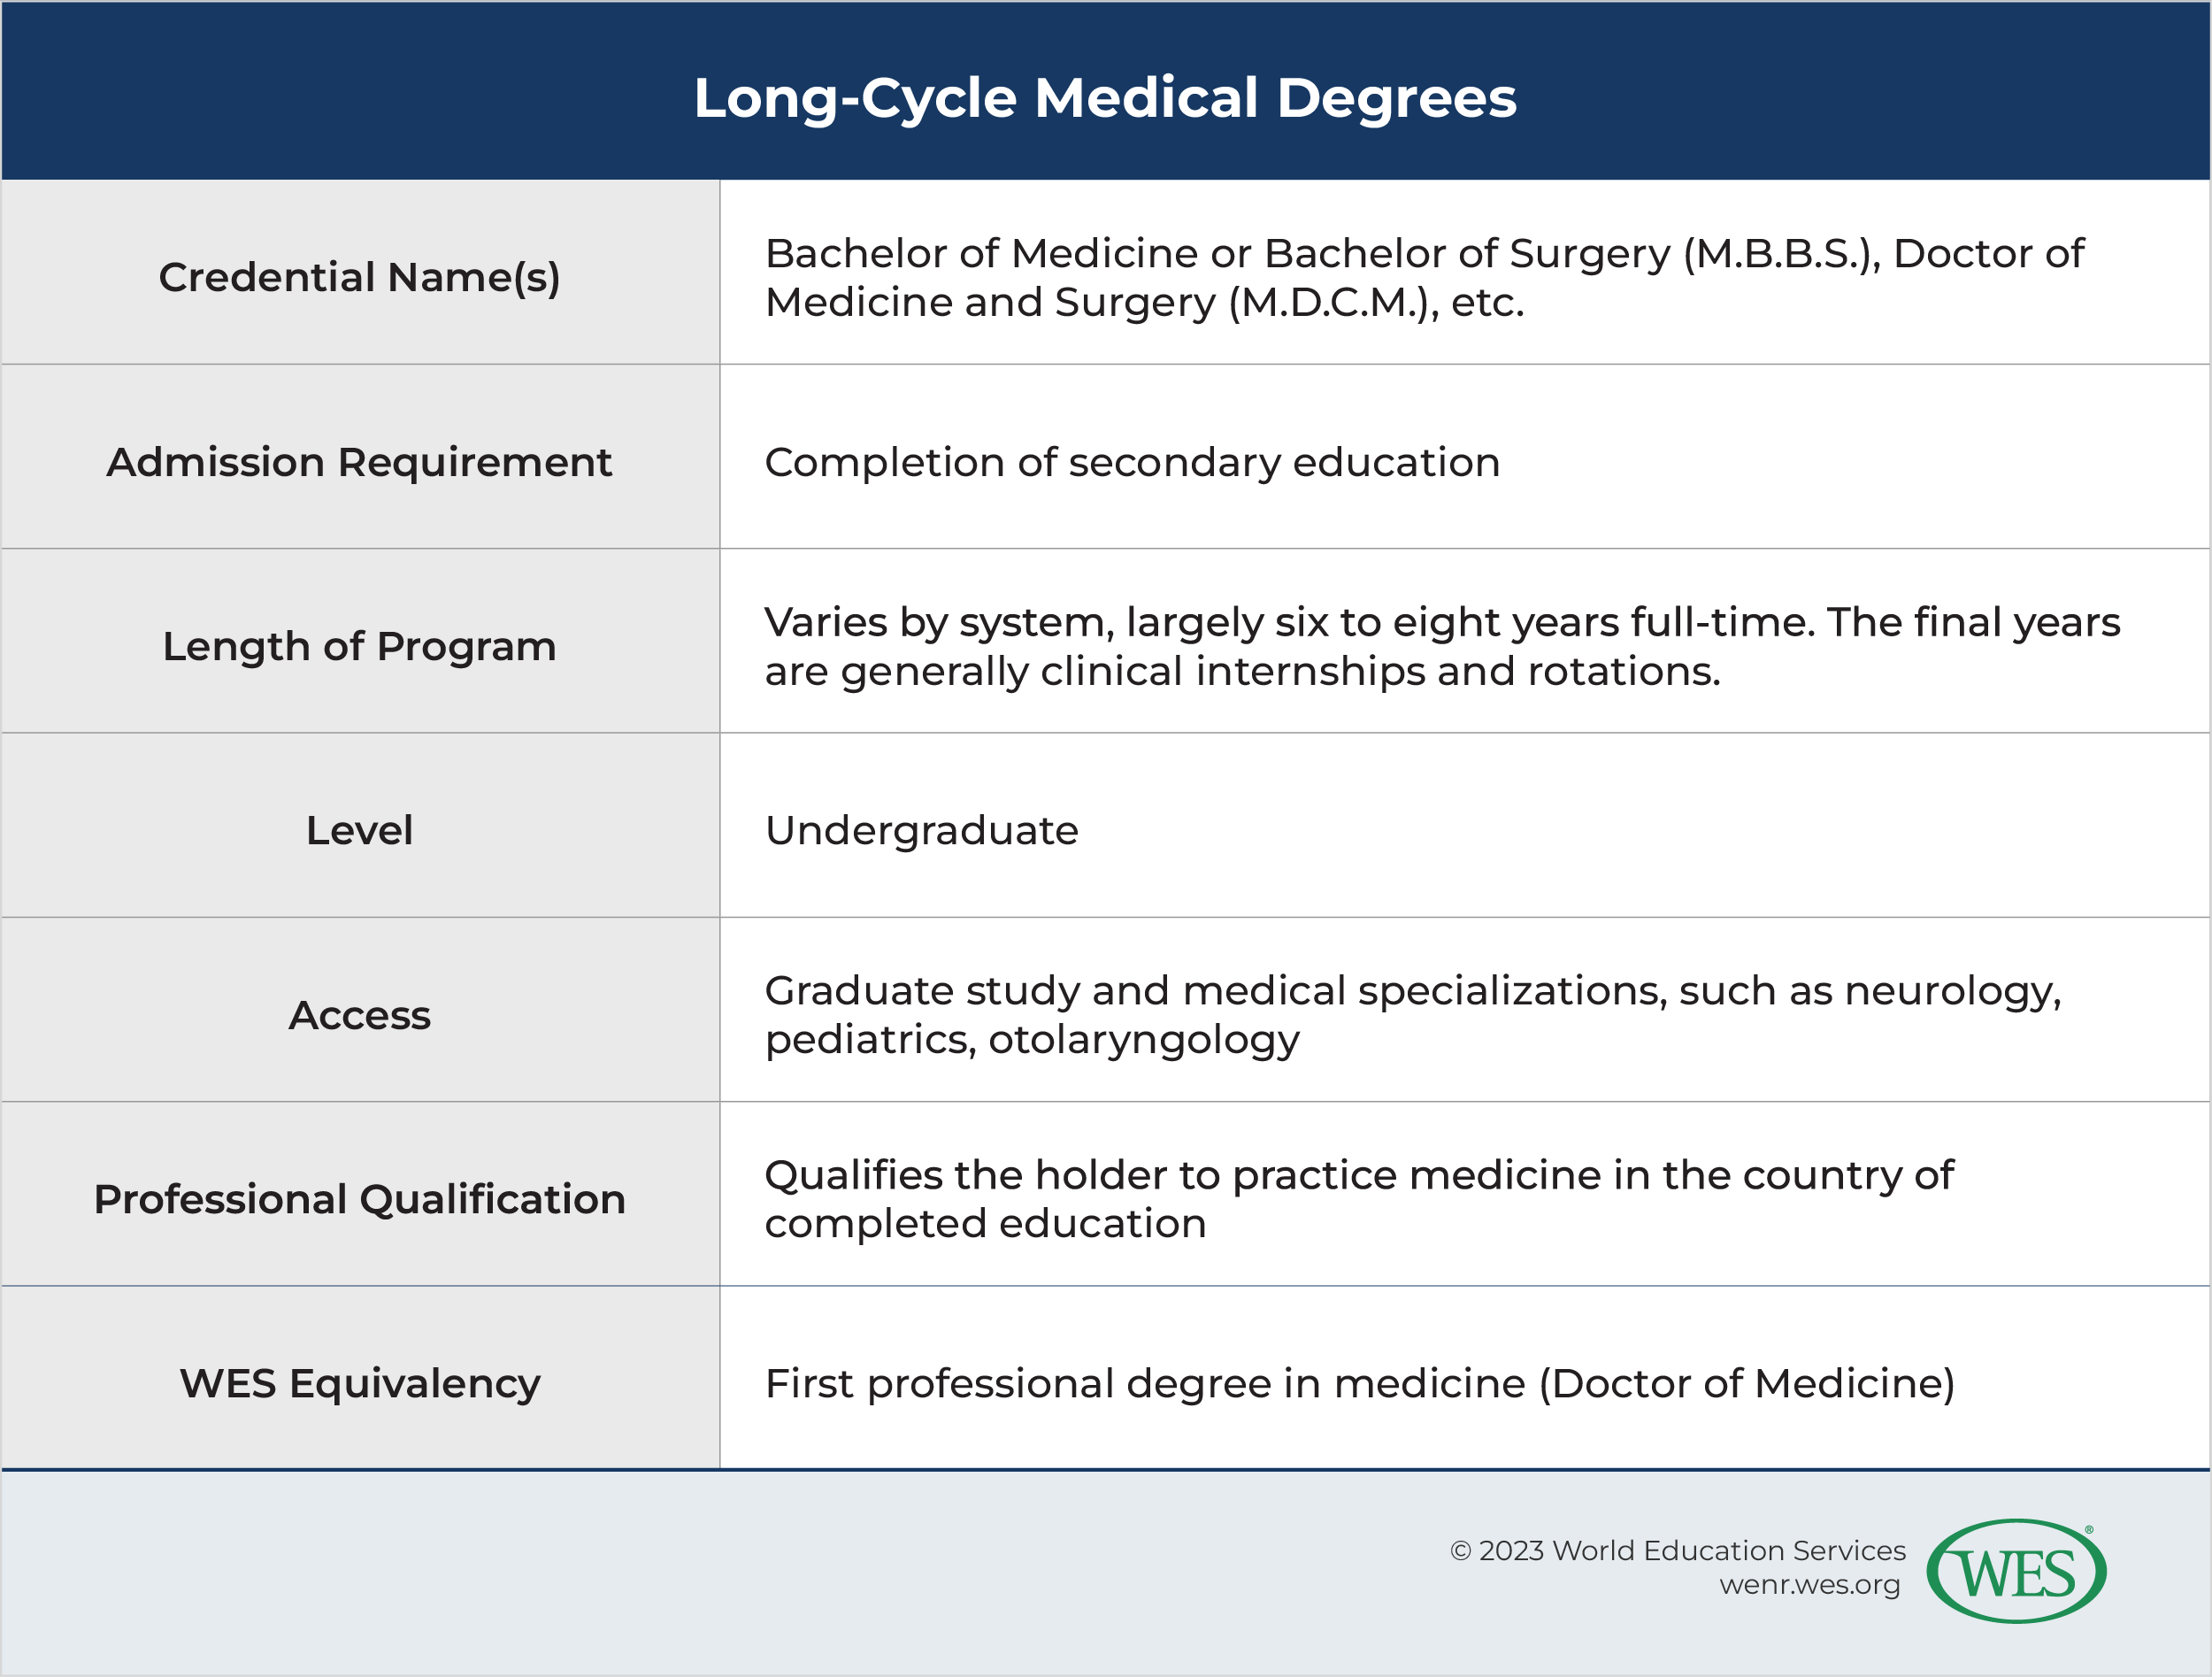 A table outlining key details of long-cycle medical degree programs. 